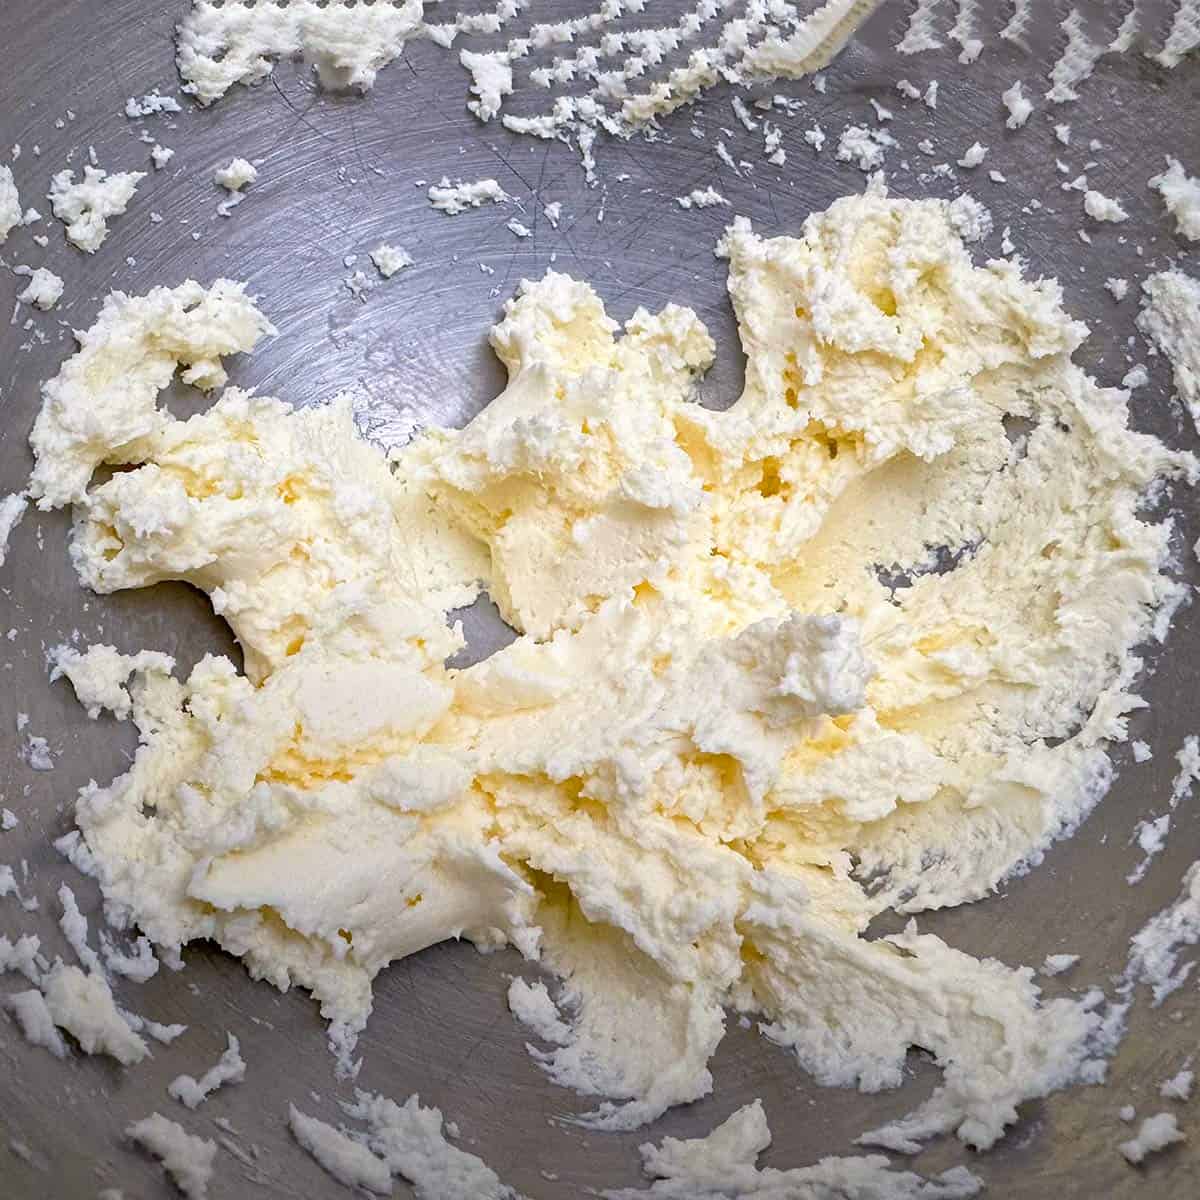 Butter and cream cheese mixed in a mixer bowl.